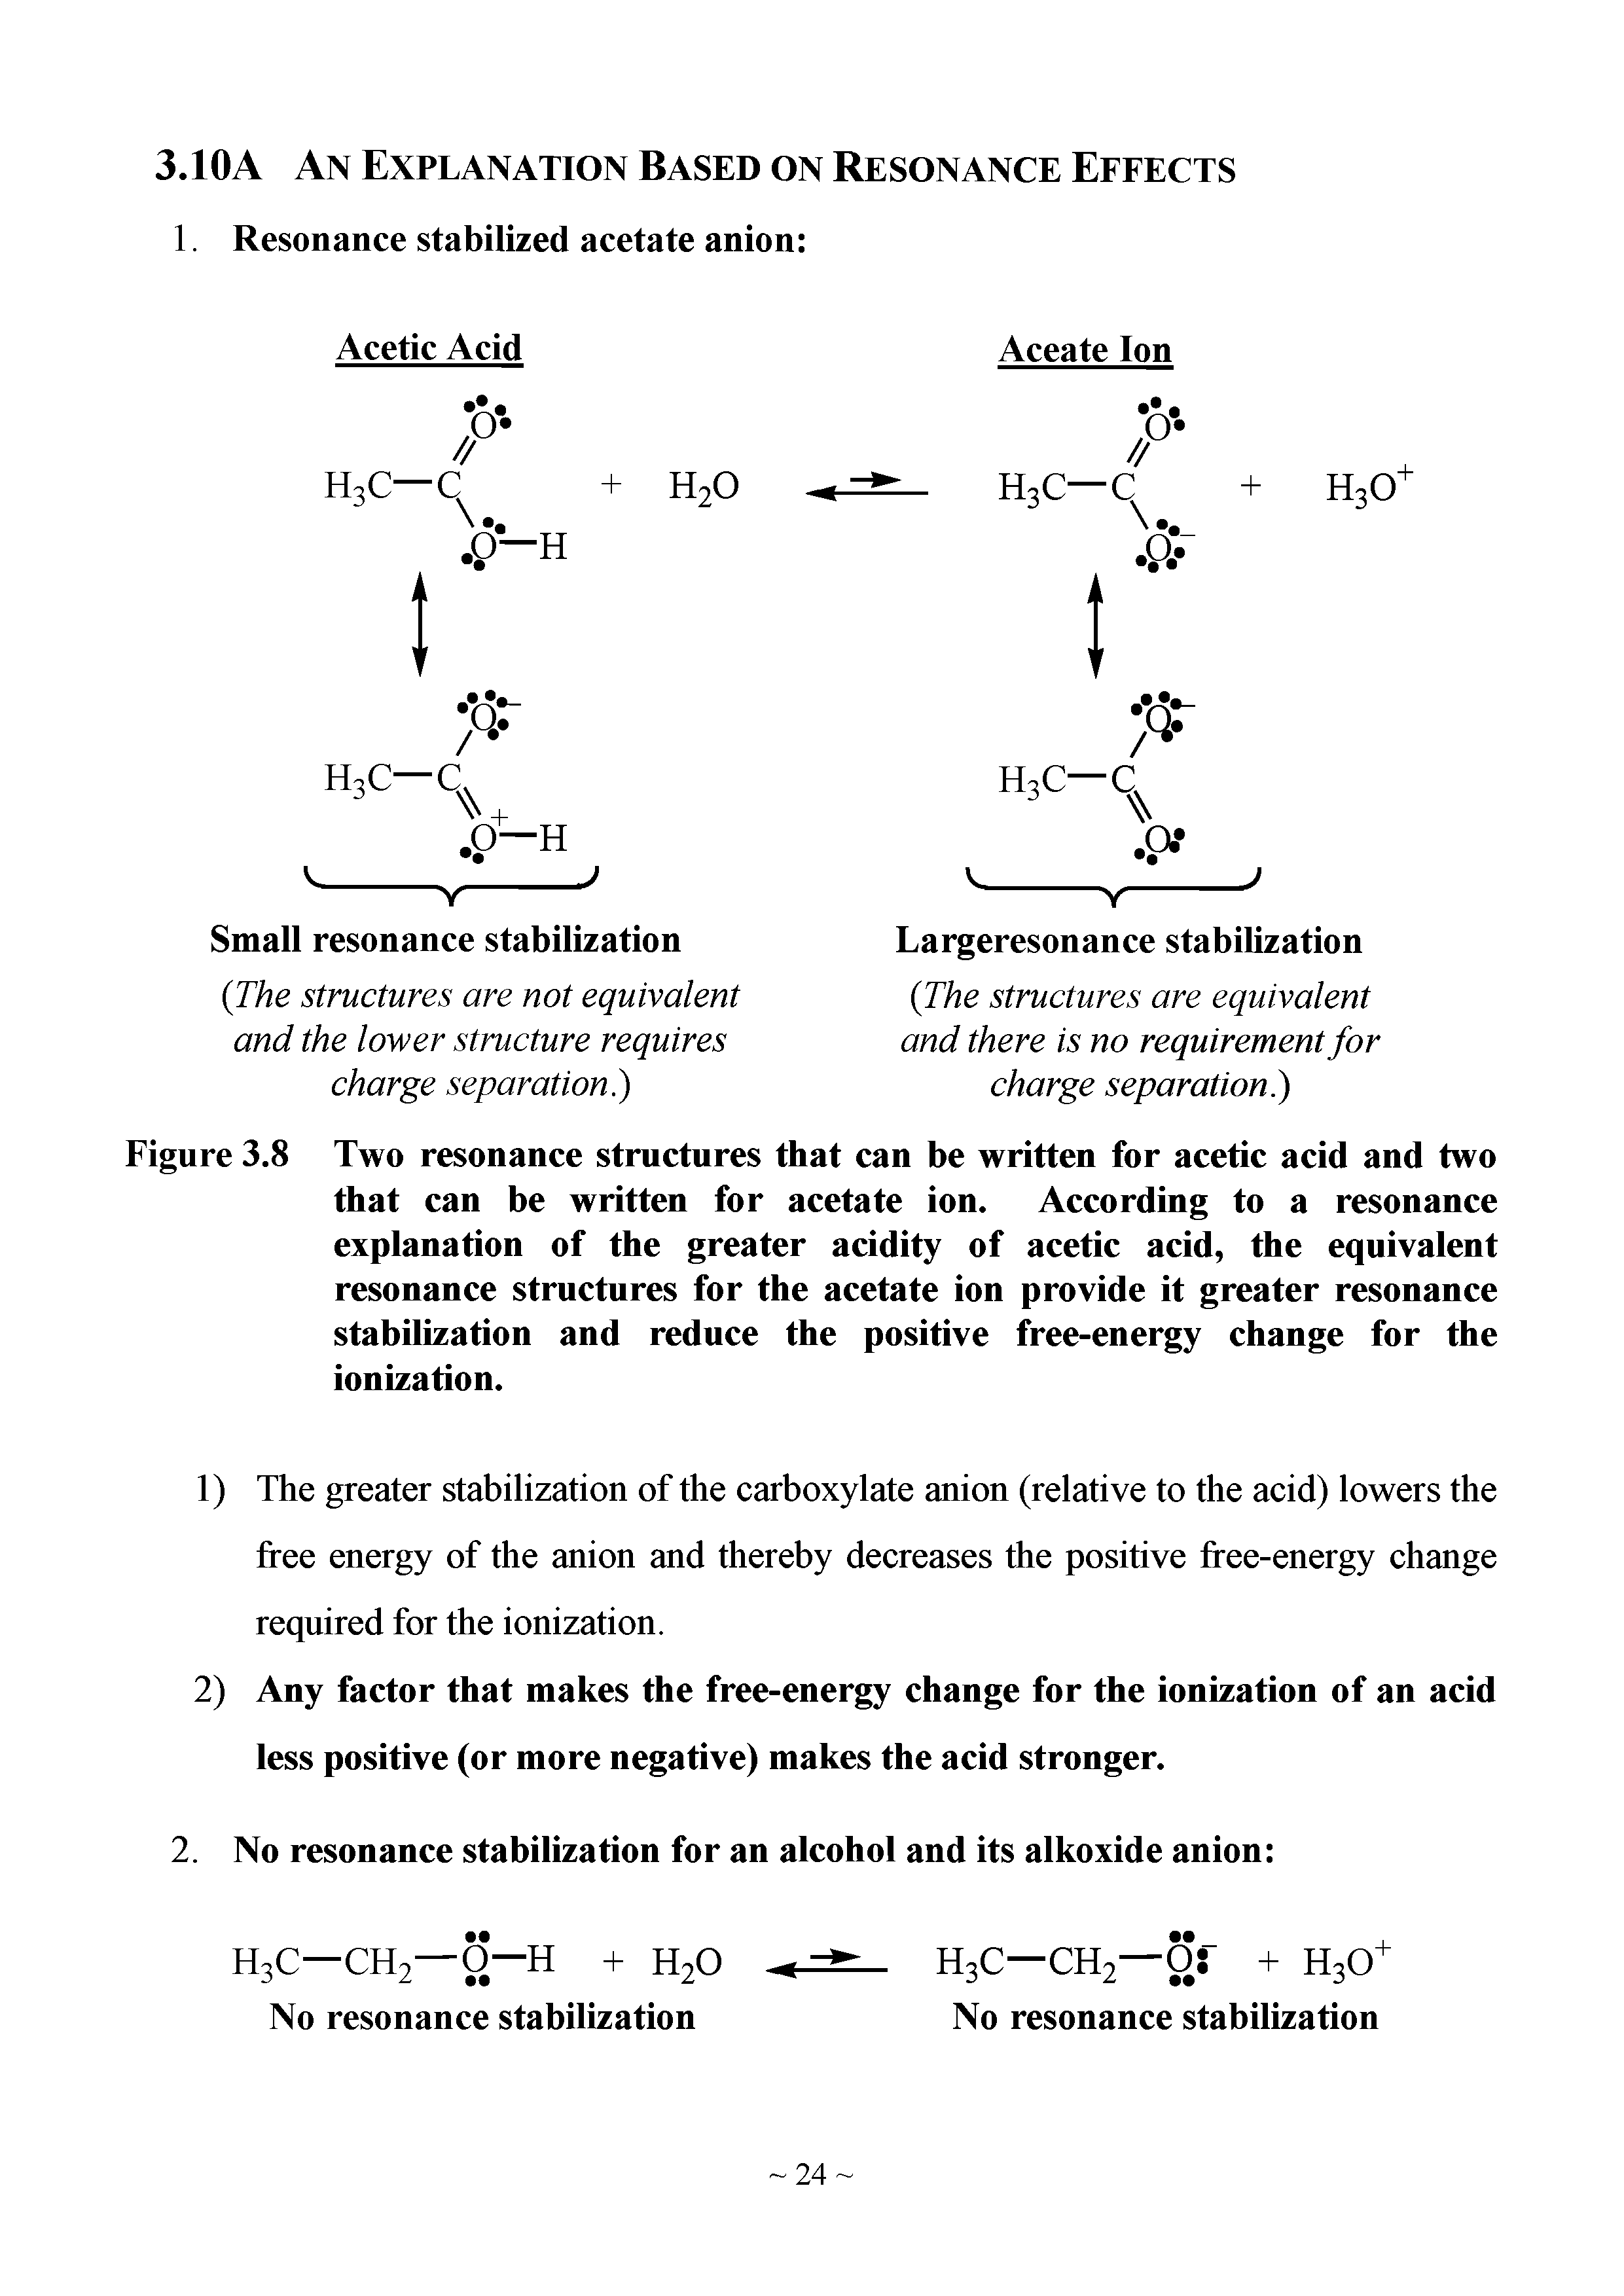 Figure 3.8 Two resonance structures that can be written for acetic acid and two that can be written for acetate ion. According to a resonance explanation of the greater acidity of acetic acid, the equivalent resonance structures for the acetate ion provide it greater resonance stabilization and reduce the positive free-energy change for the ionization.